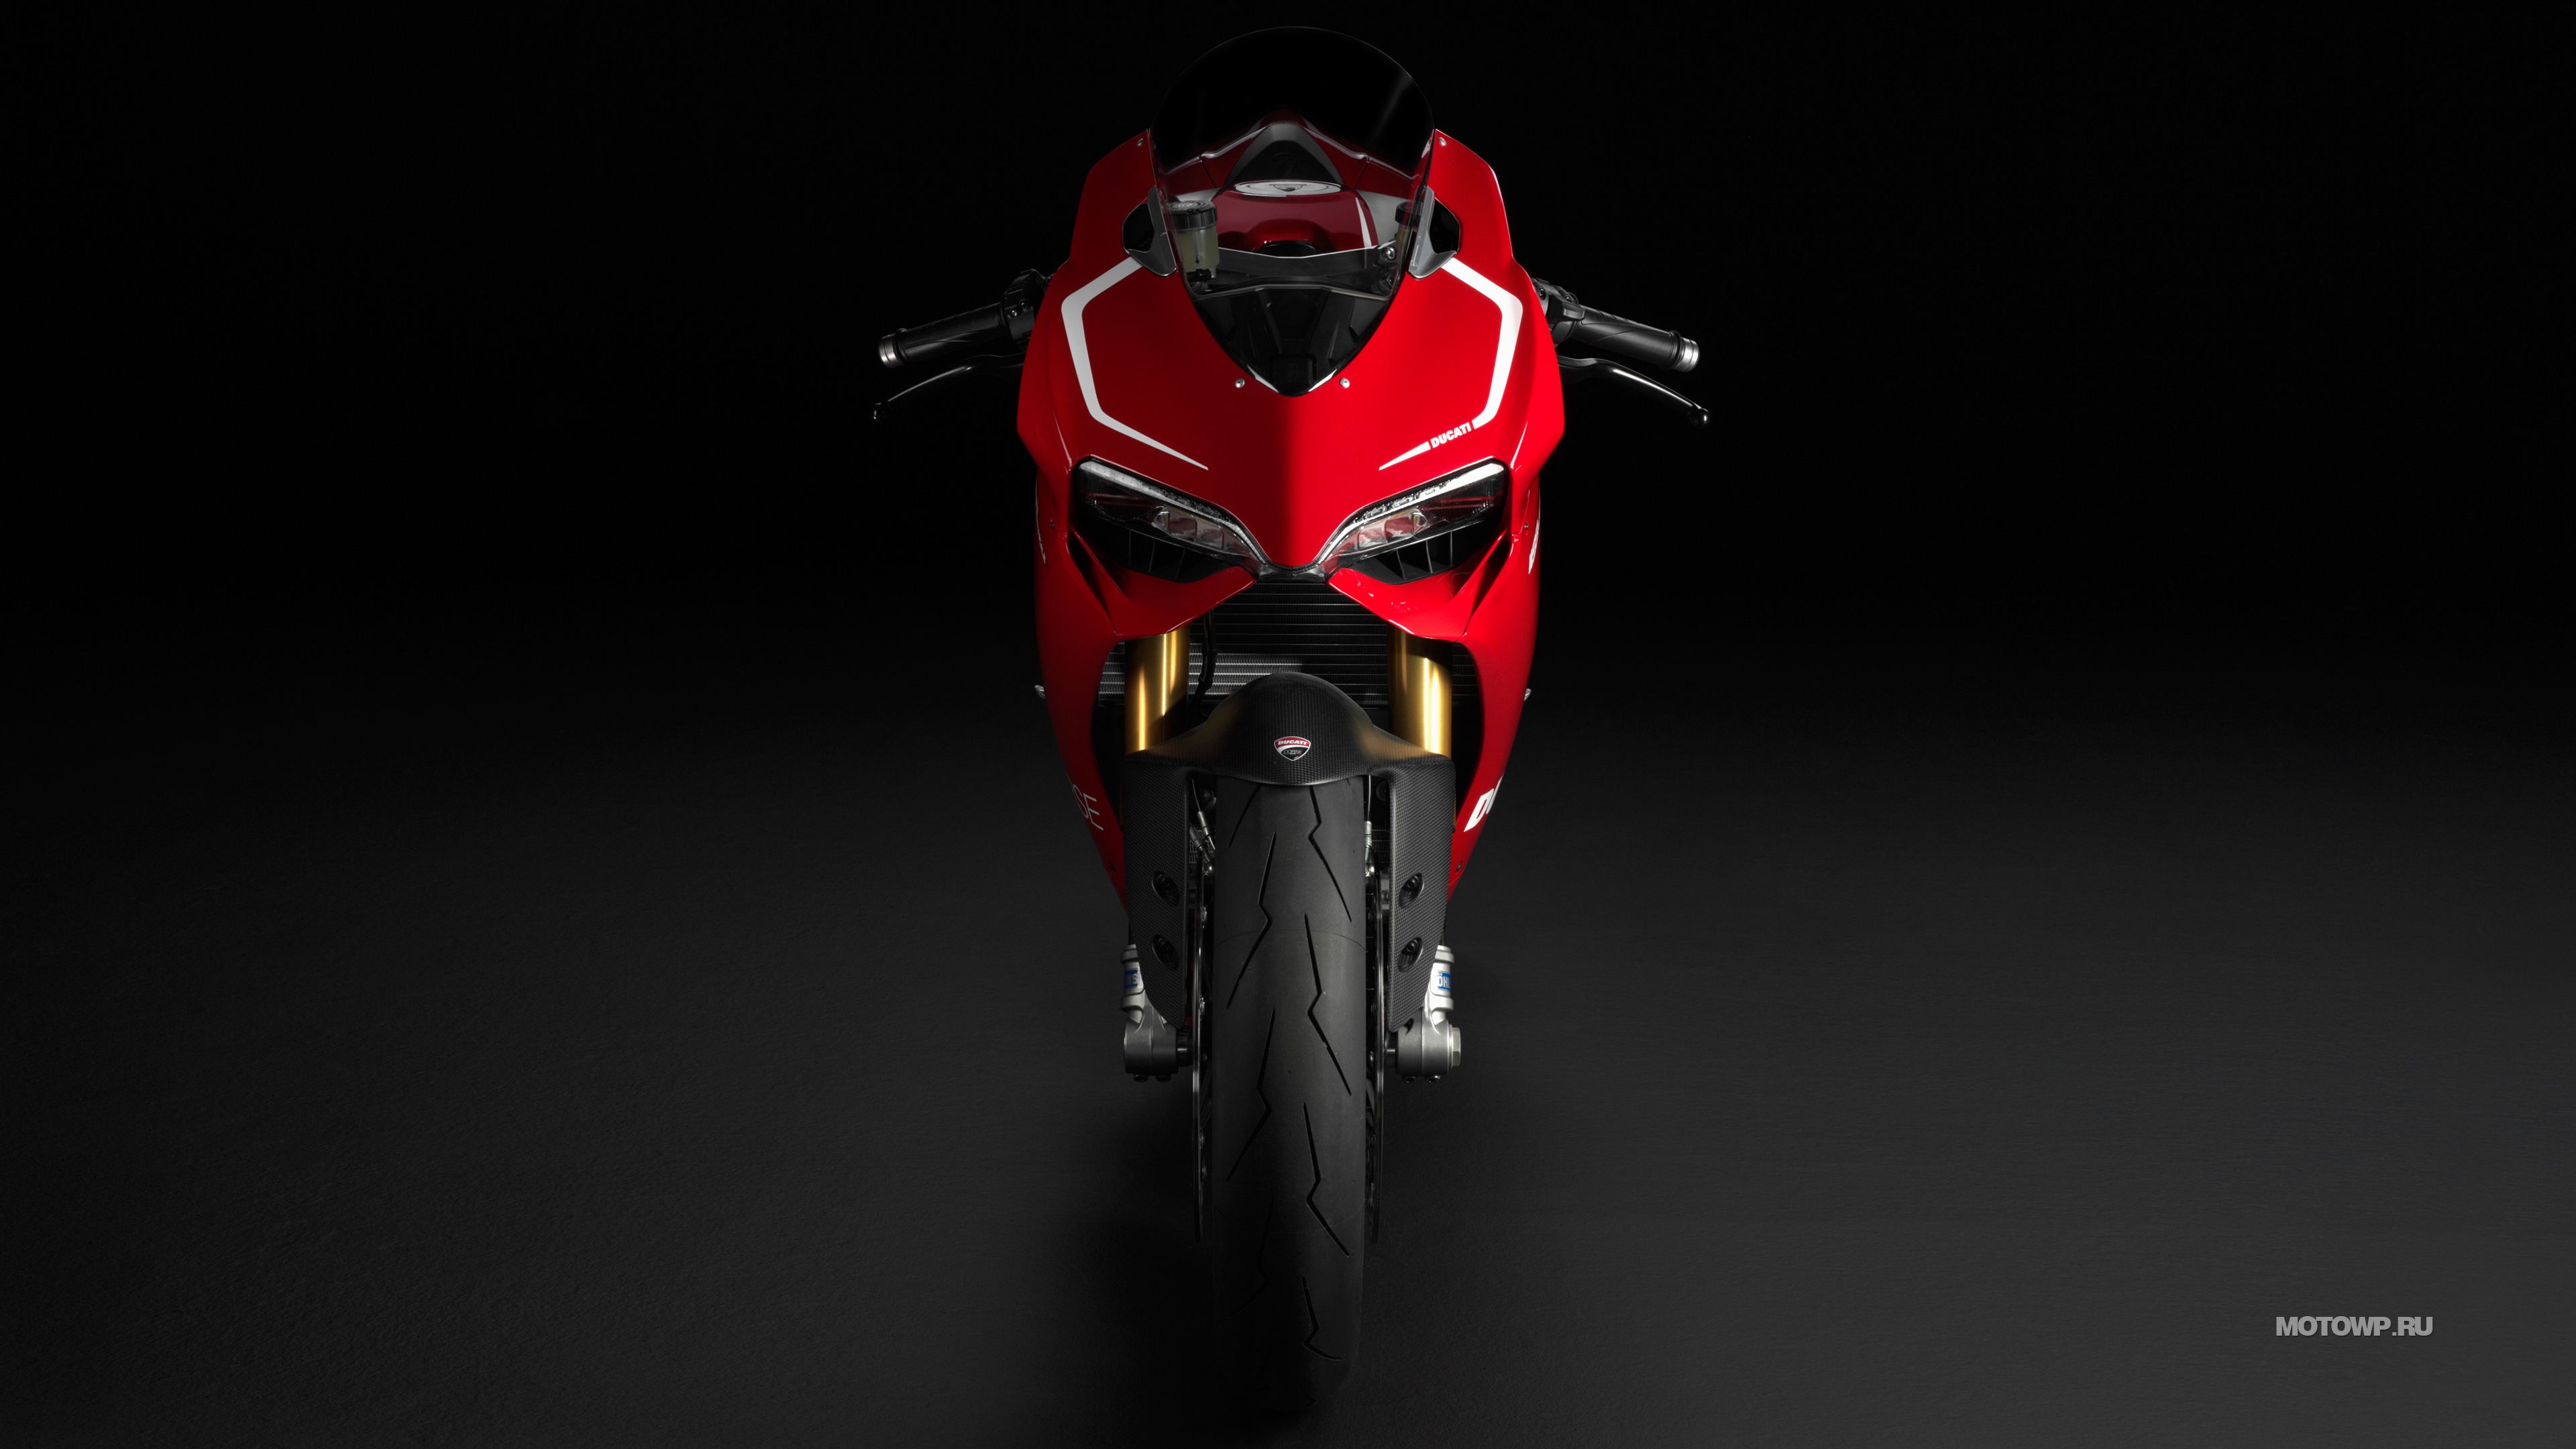 Free download Ducati 1199 Panigale Backgrounds 4K Download [3840x2160] for  your Desktop, Mobile & Tablet | Explore 83+ Ducati Panigale Wallpapers | Ducati  Wallpaper Downloads, Ducati HD Wallpaper, Ducati Desktop Wallpaper